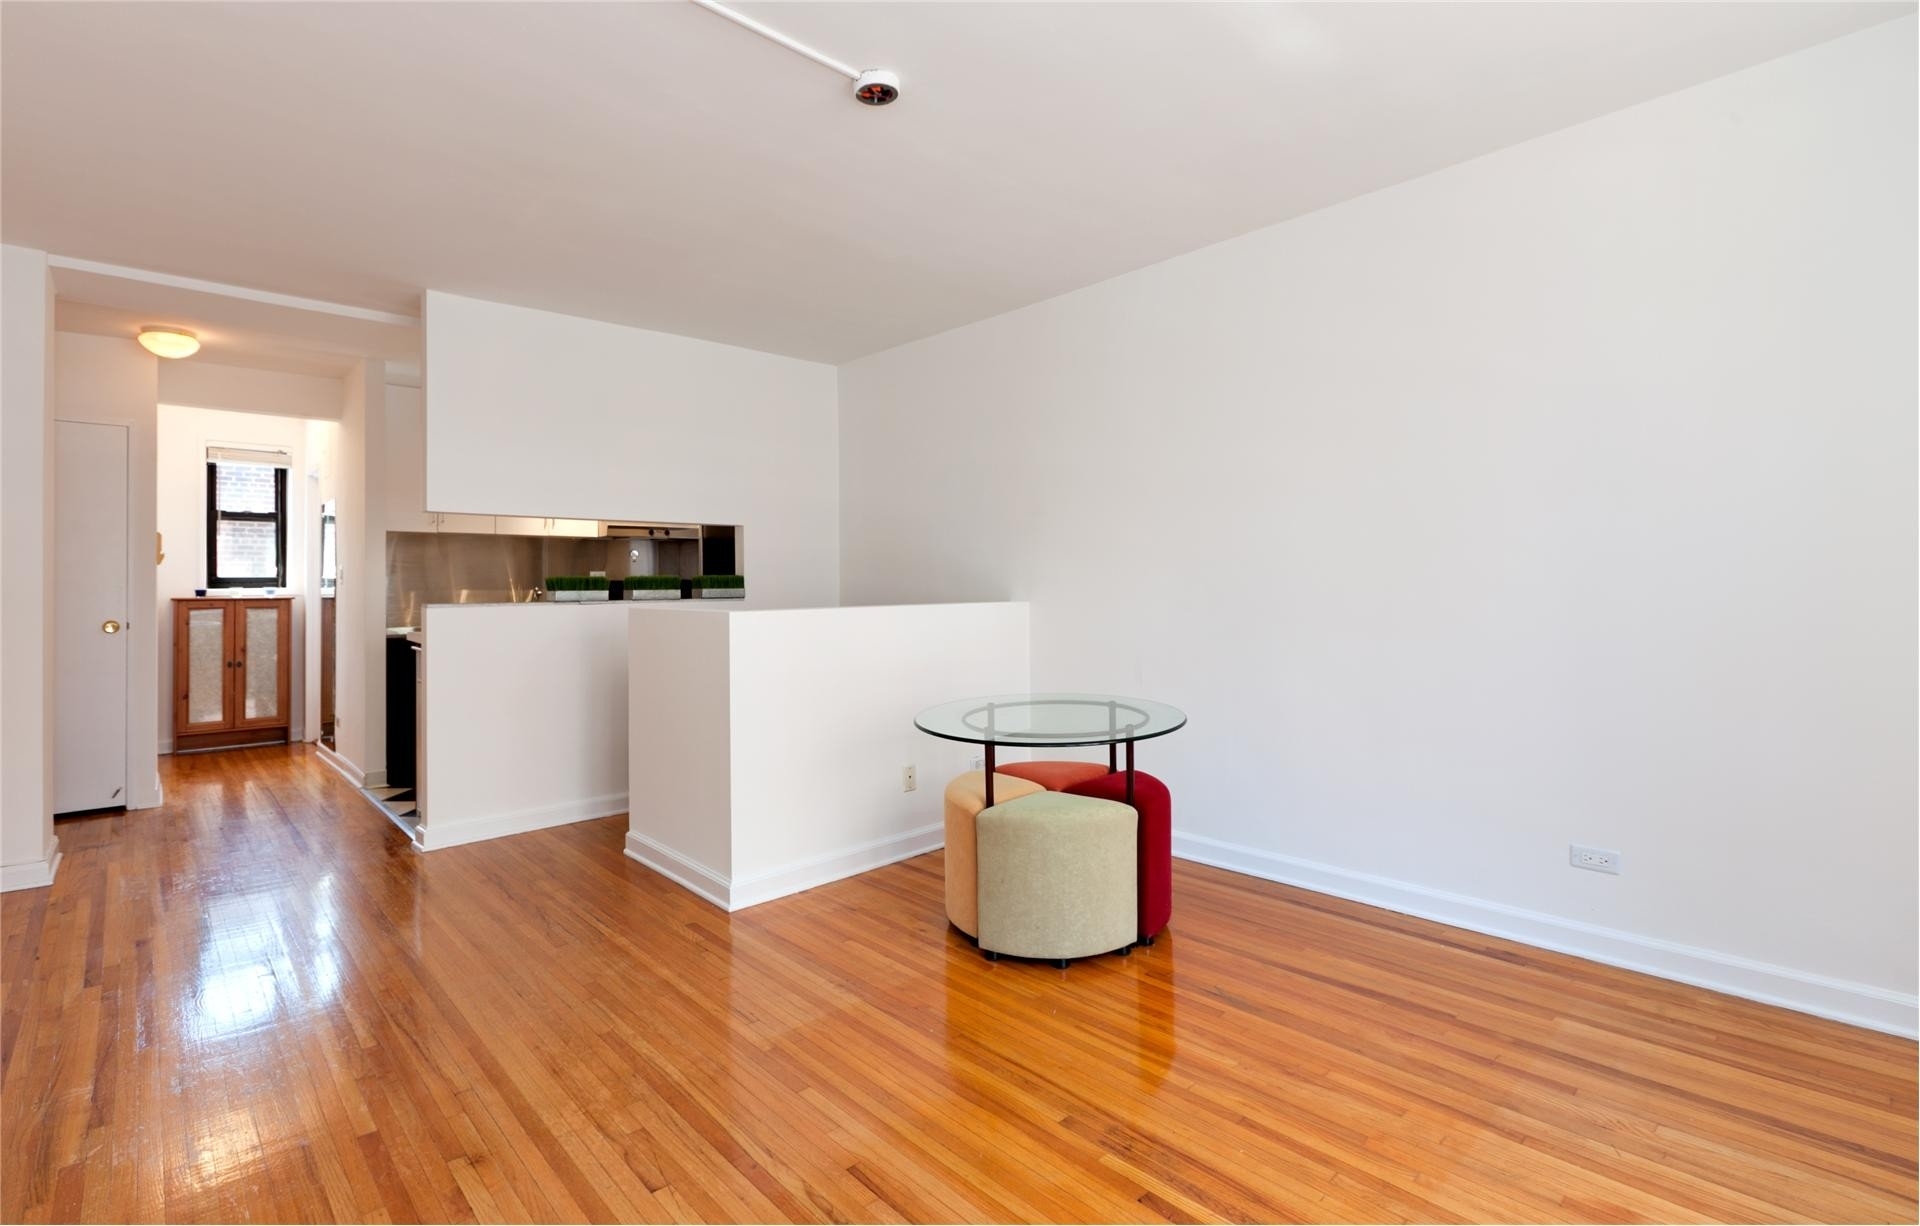 Property at 400 West 58th St, 6A New York